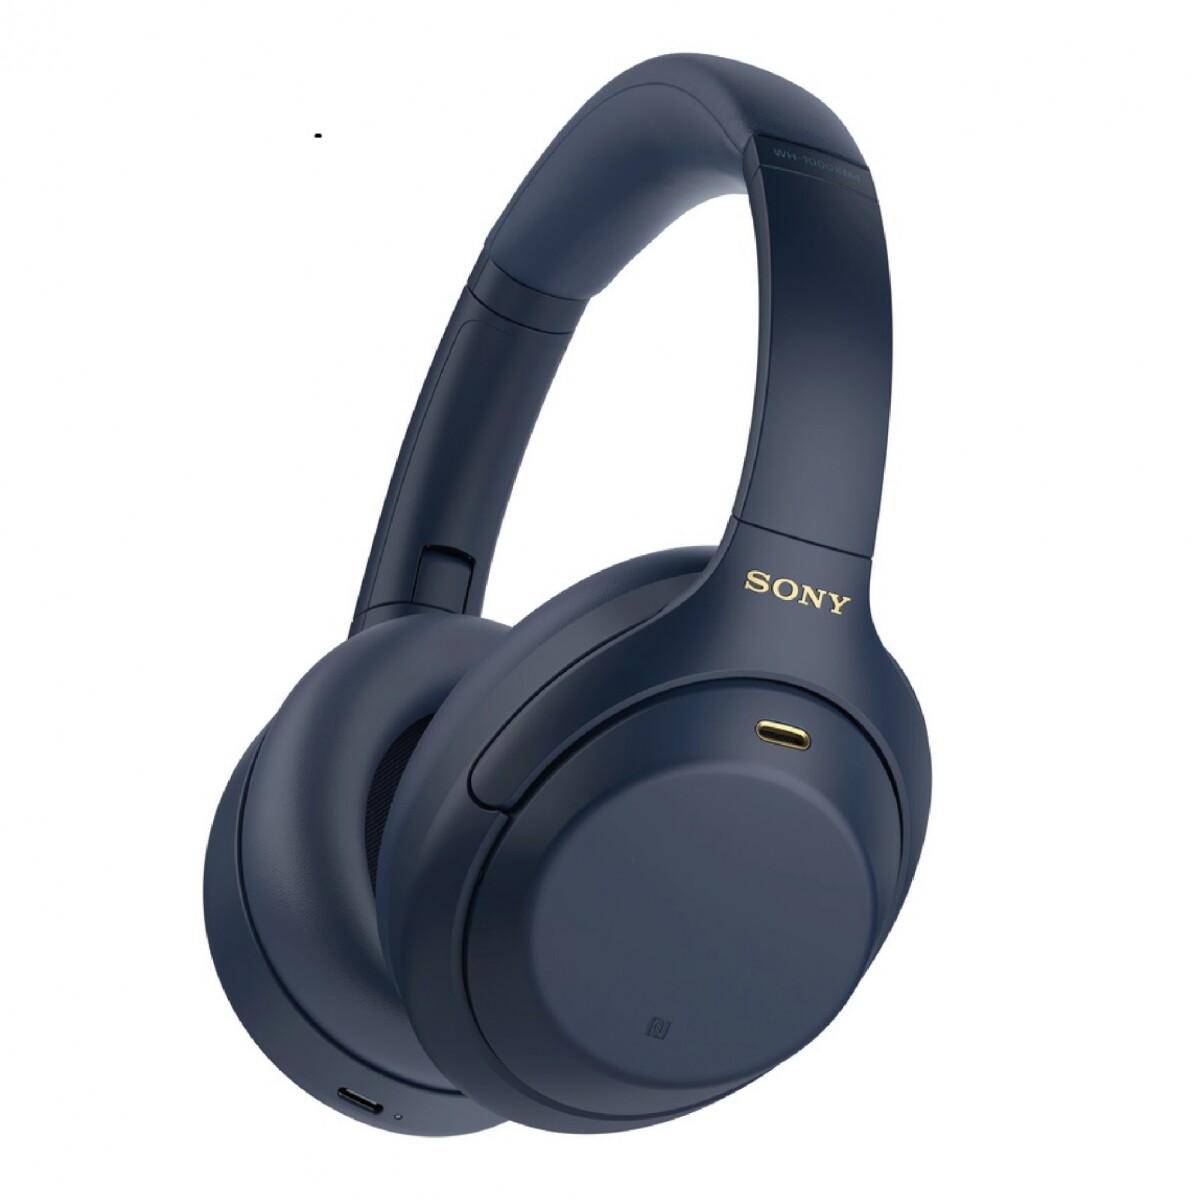 auriculares sony inalámbricos con noise cancelling wh-1000xm4 